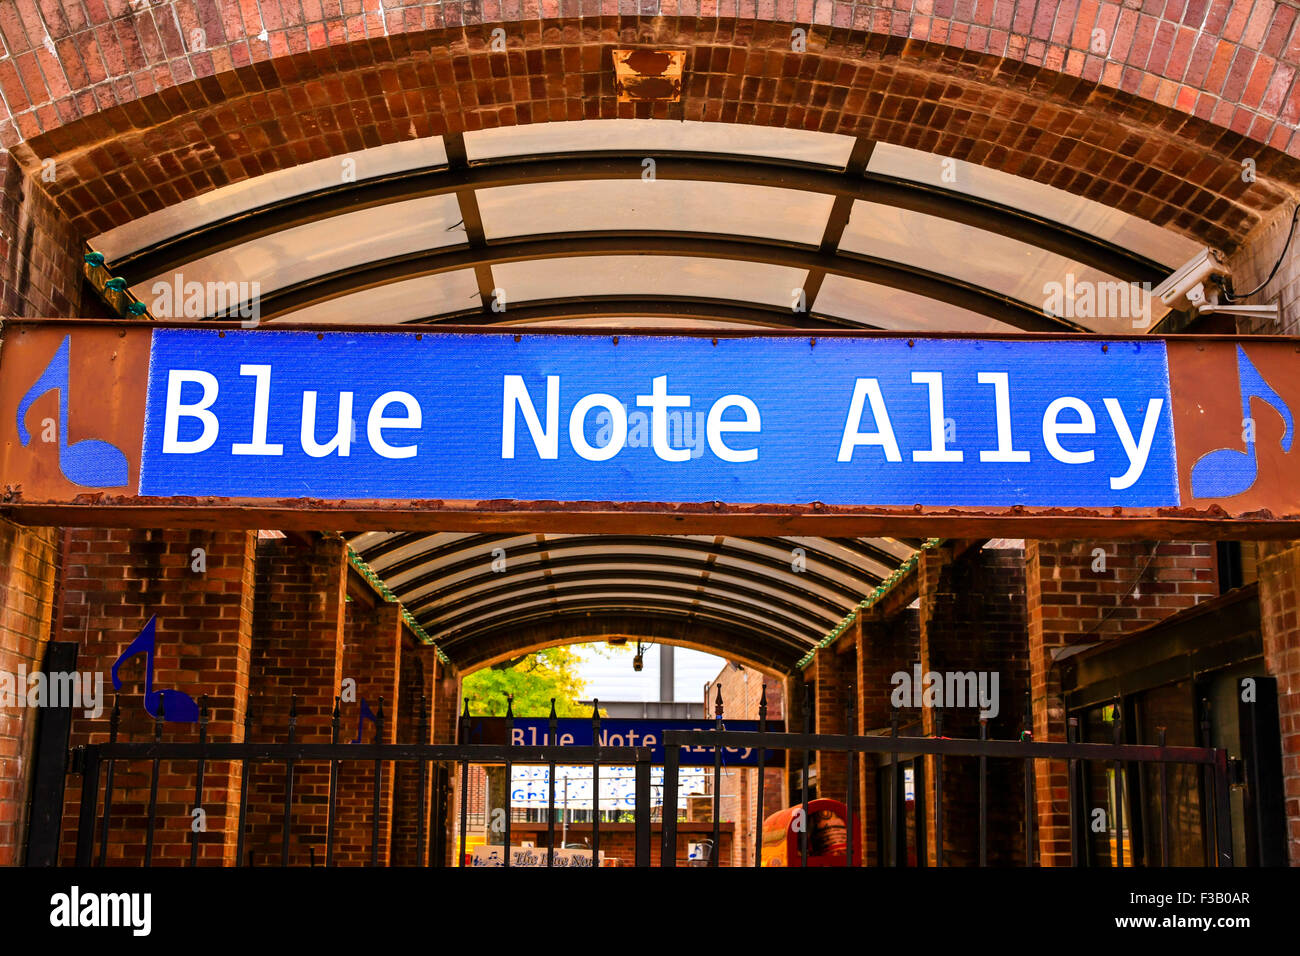 Blue Note Alley overhead sign on Beale Street a Memphis, Tennessee Foto Stock